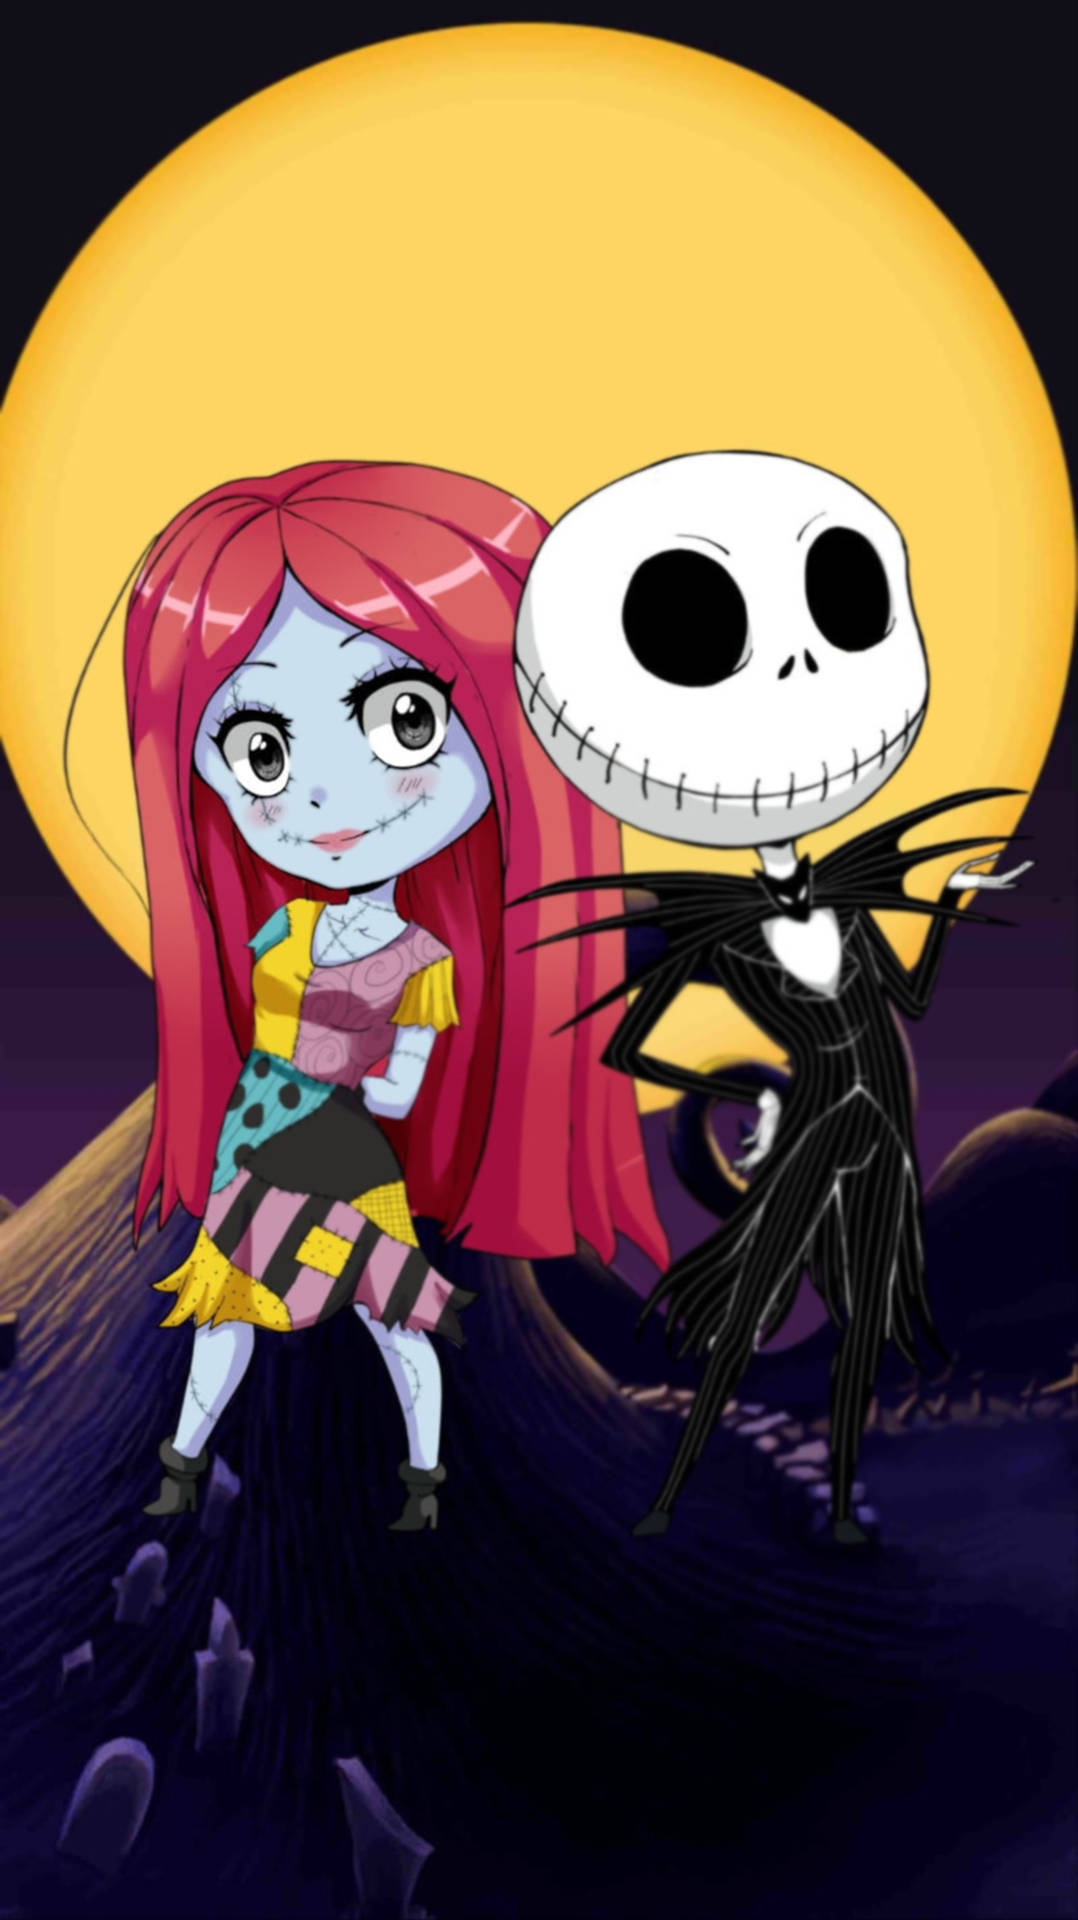 Anime Jack and Sally - The Nightmare Before